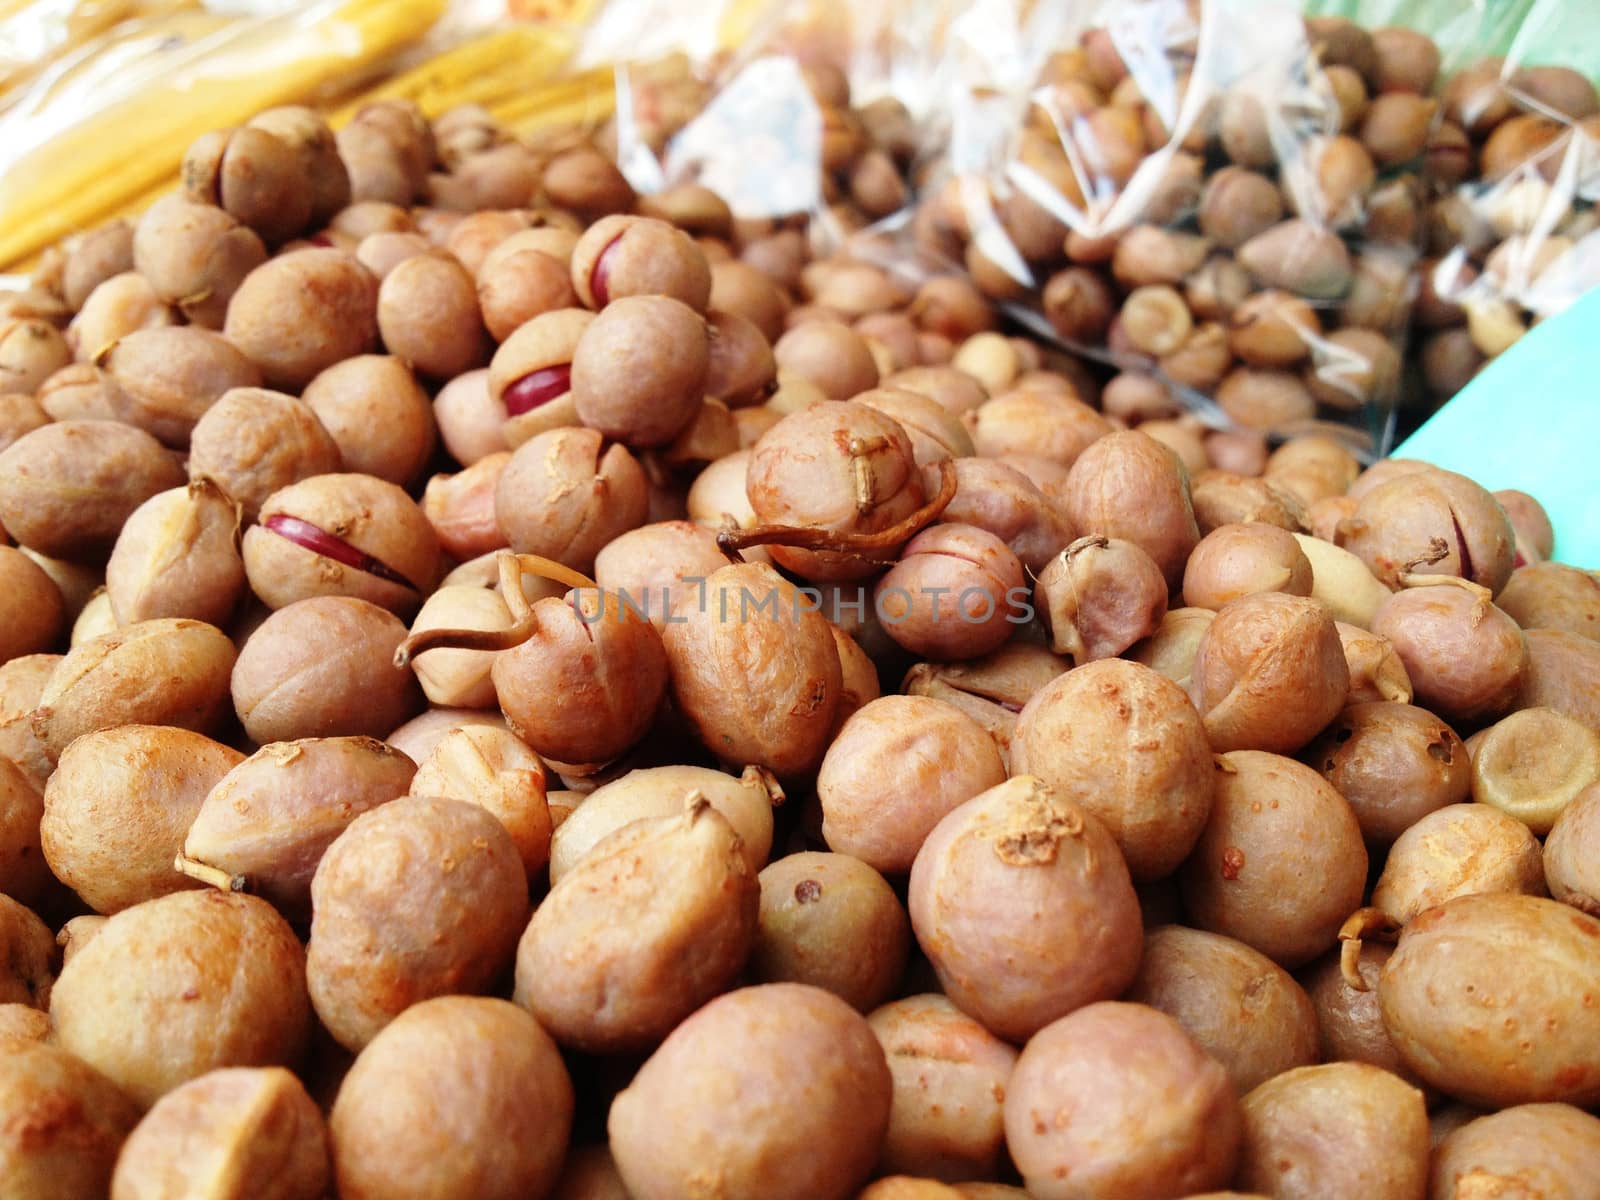 Boiled Bambara Groundnut, a kind of Thai sweetmeat, is a popular form of street food in Thailand